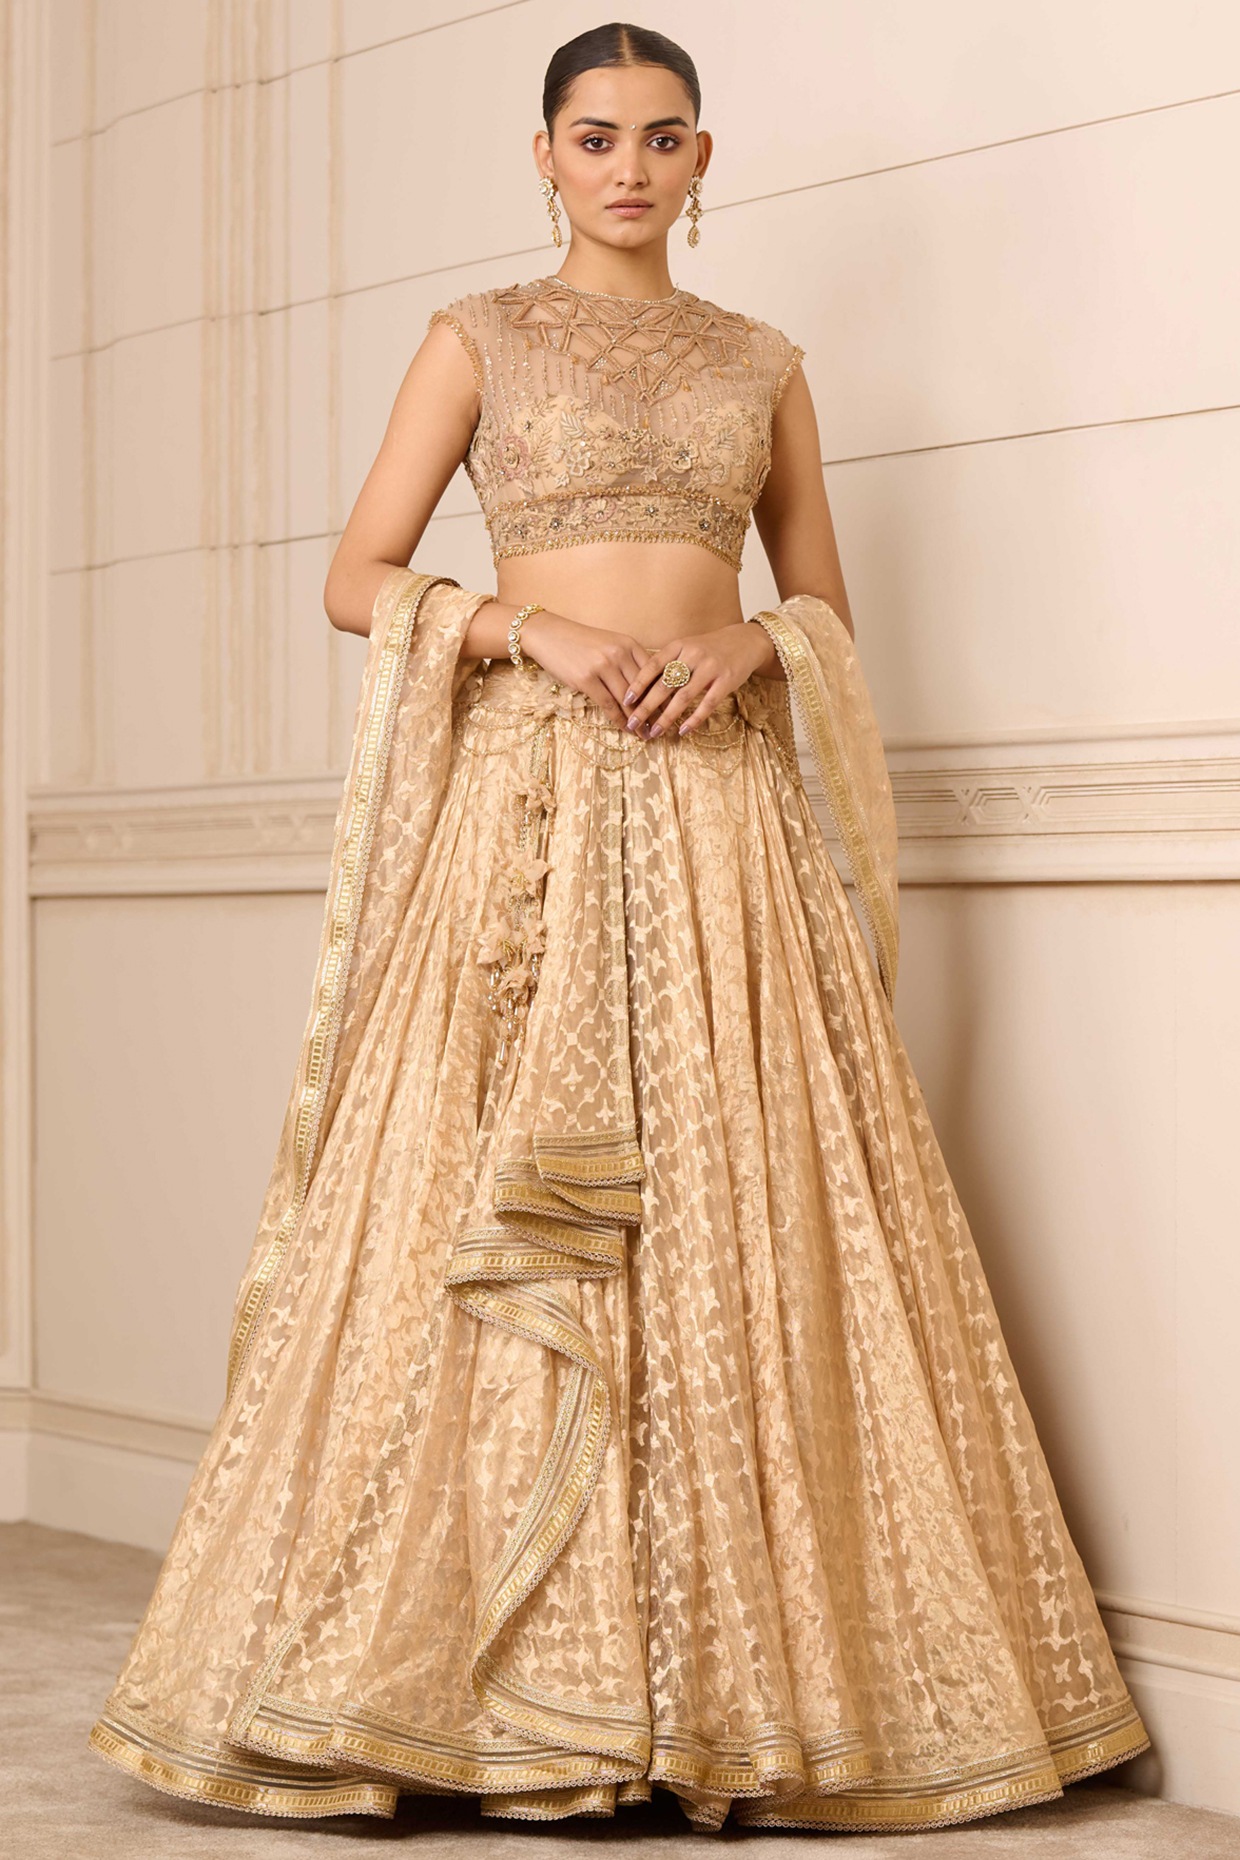 Lehenga Trends All 2022 Brides Should Know About! | Latest bridal lehenga  designs, Latest bridal lehenga, Mirror work lehenga